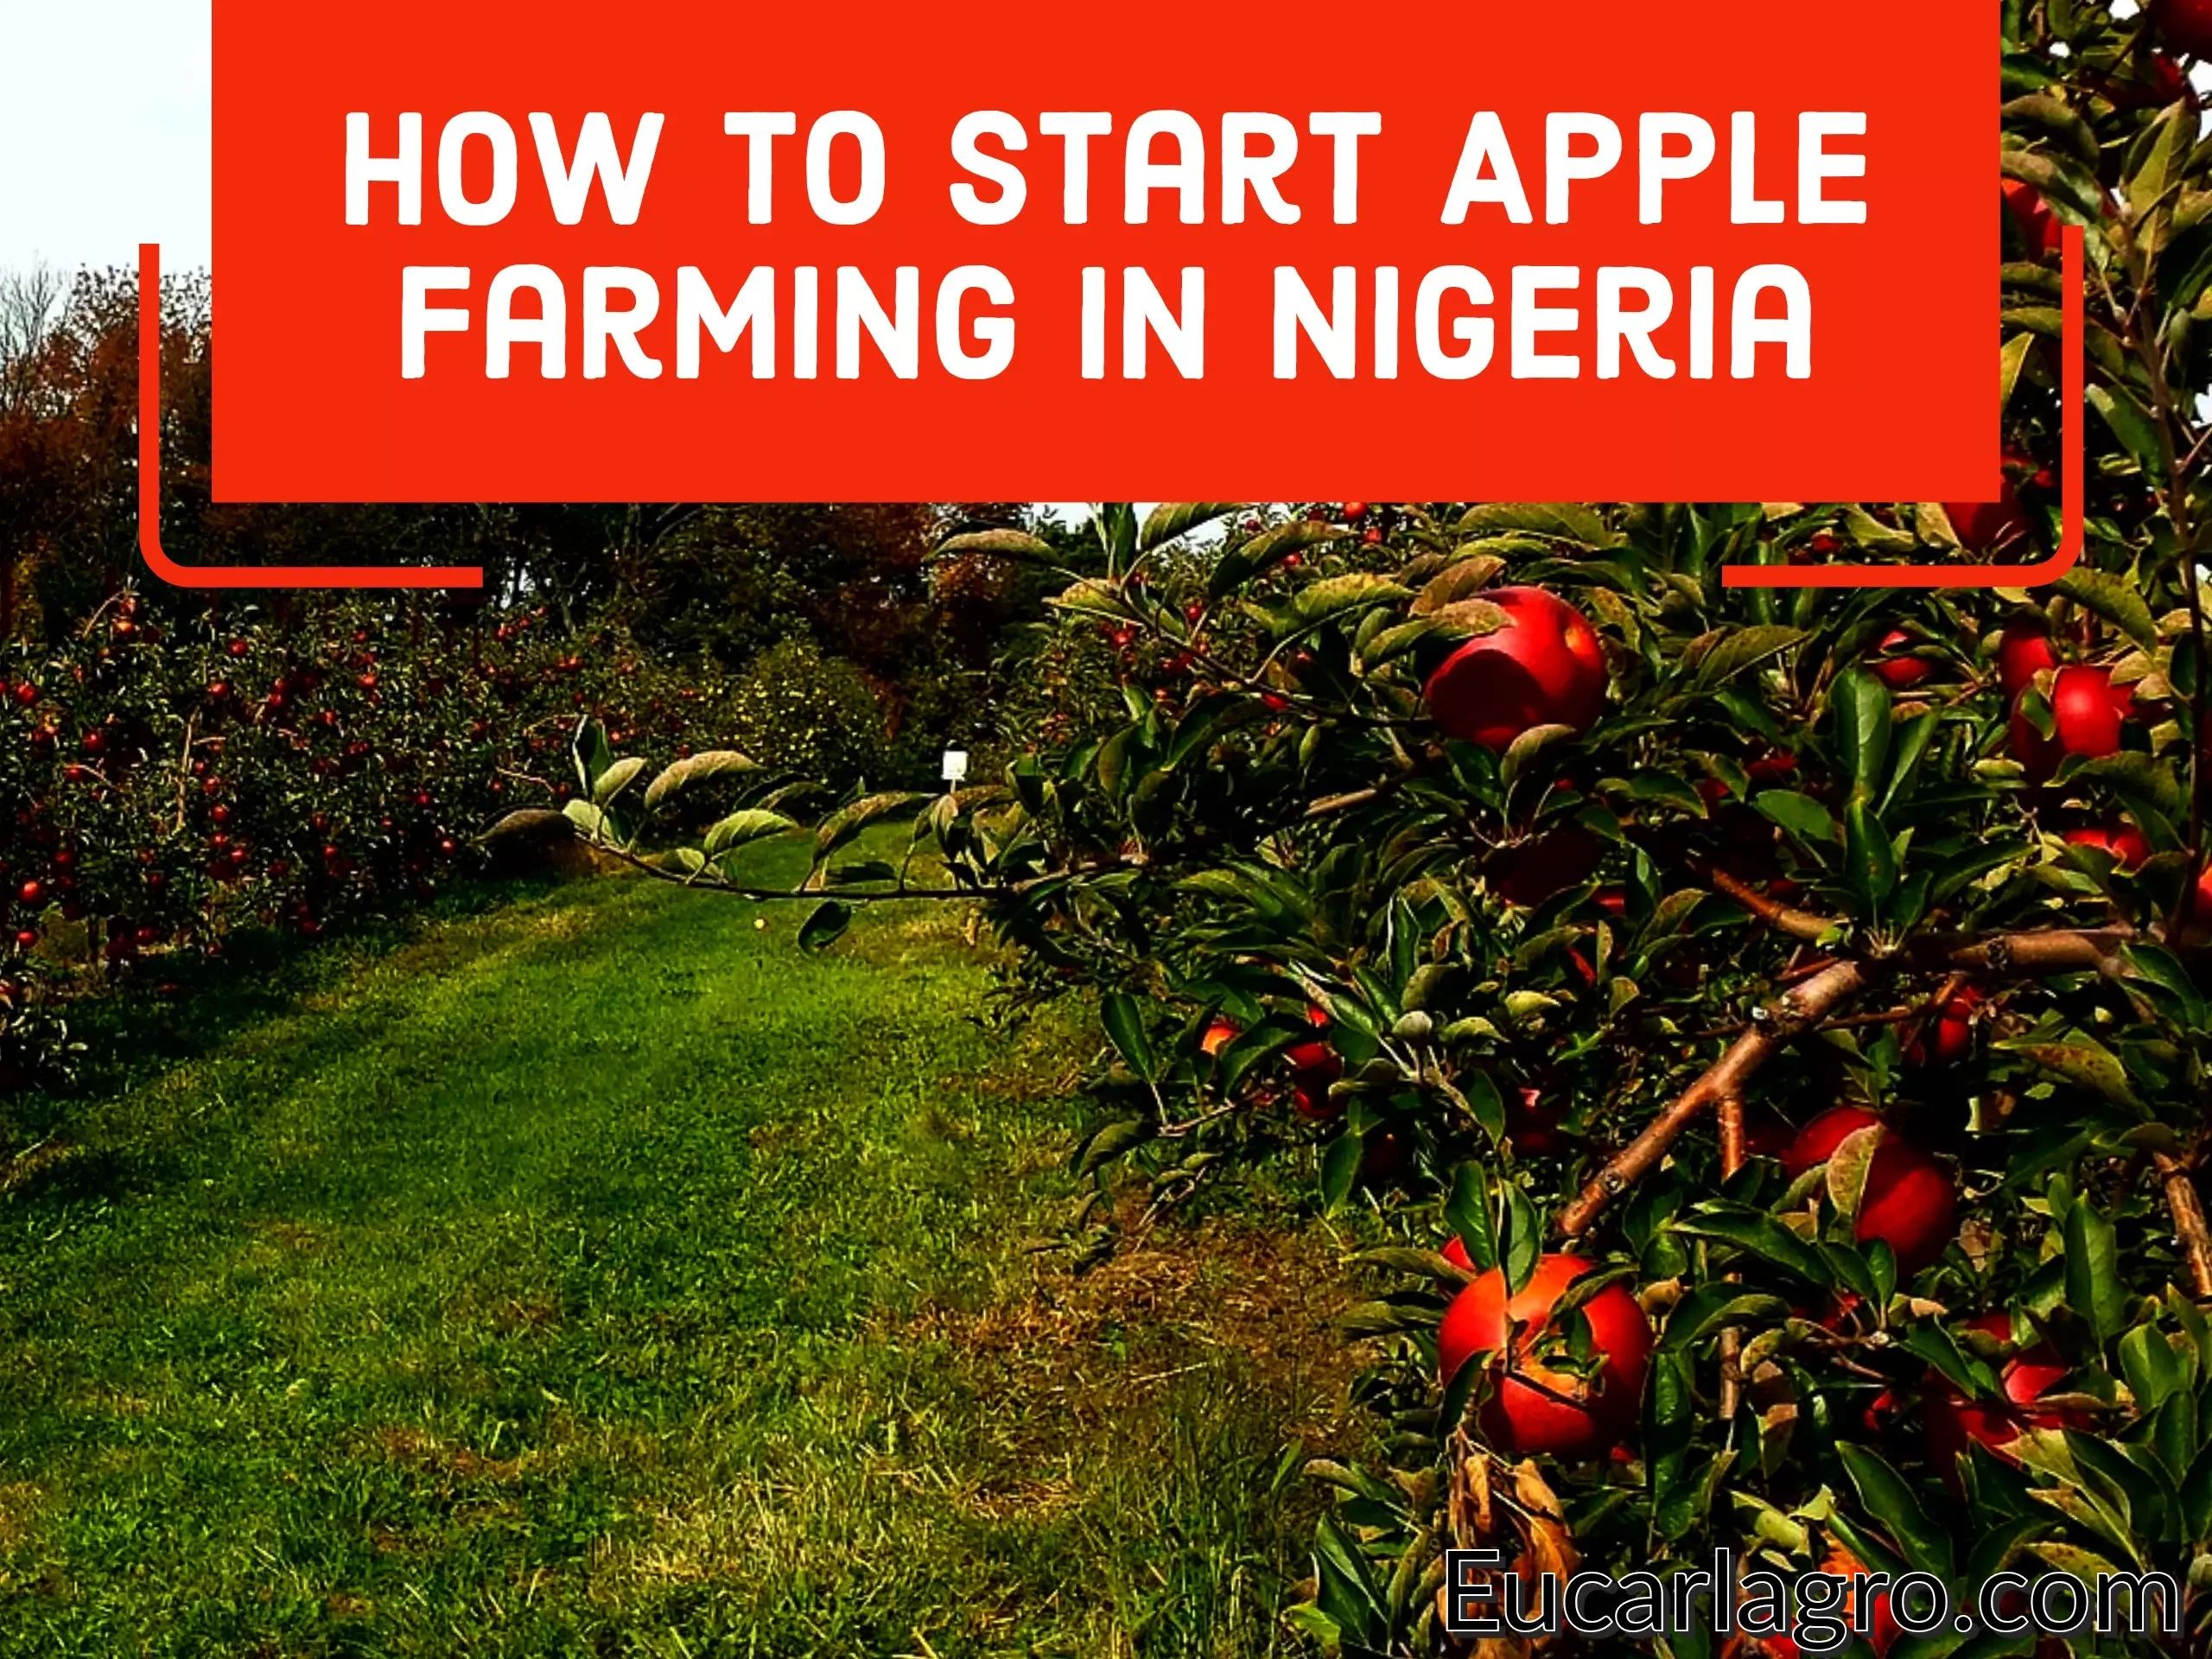 How to start apple farming in Nigeria